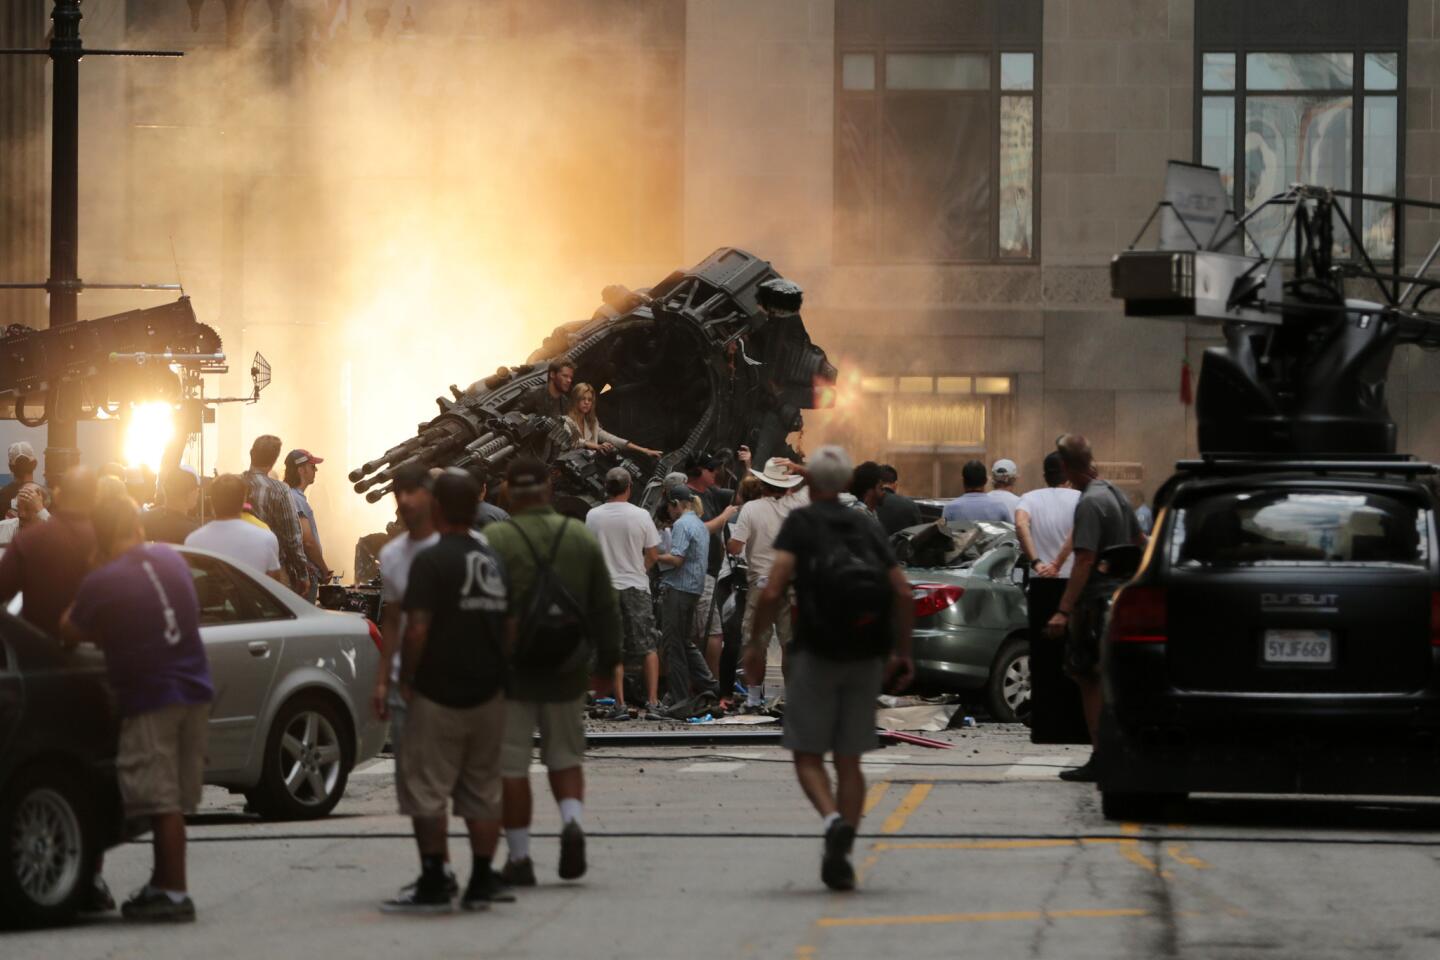 'Transformers 4' in Chicago